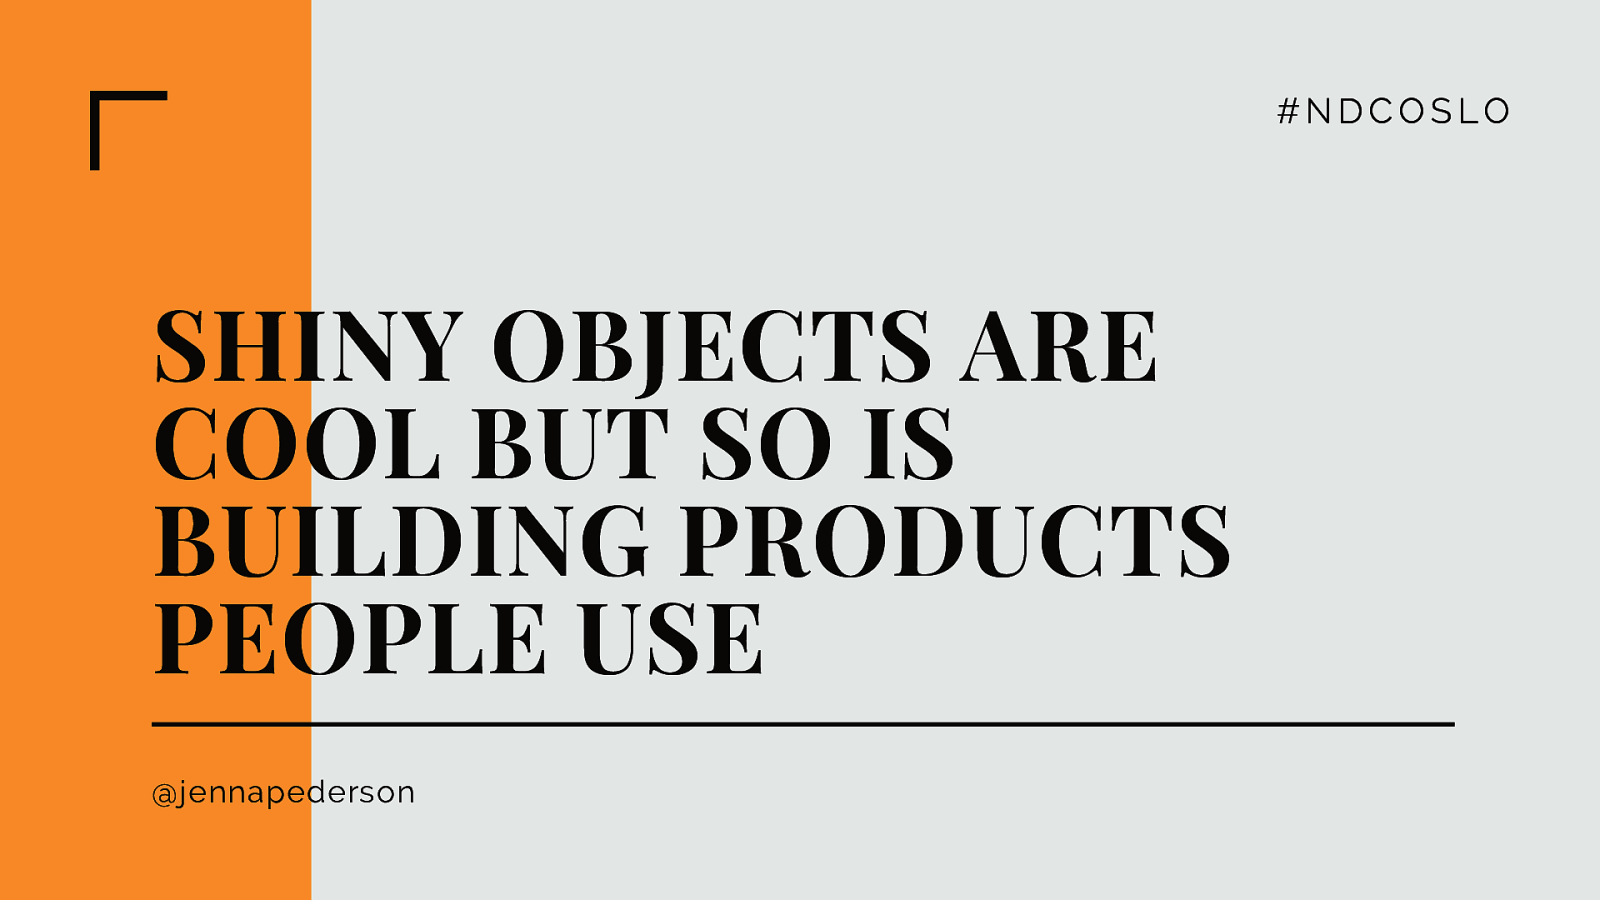 Shiny objects are cool, but so is building products people use